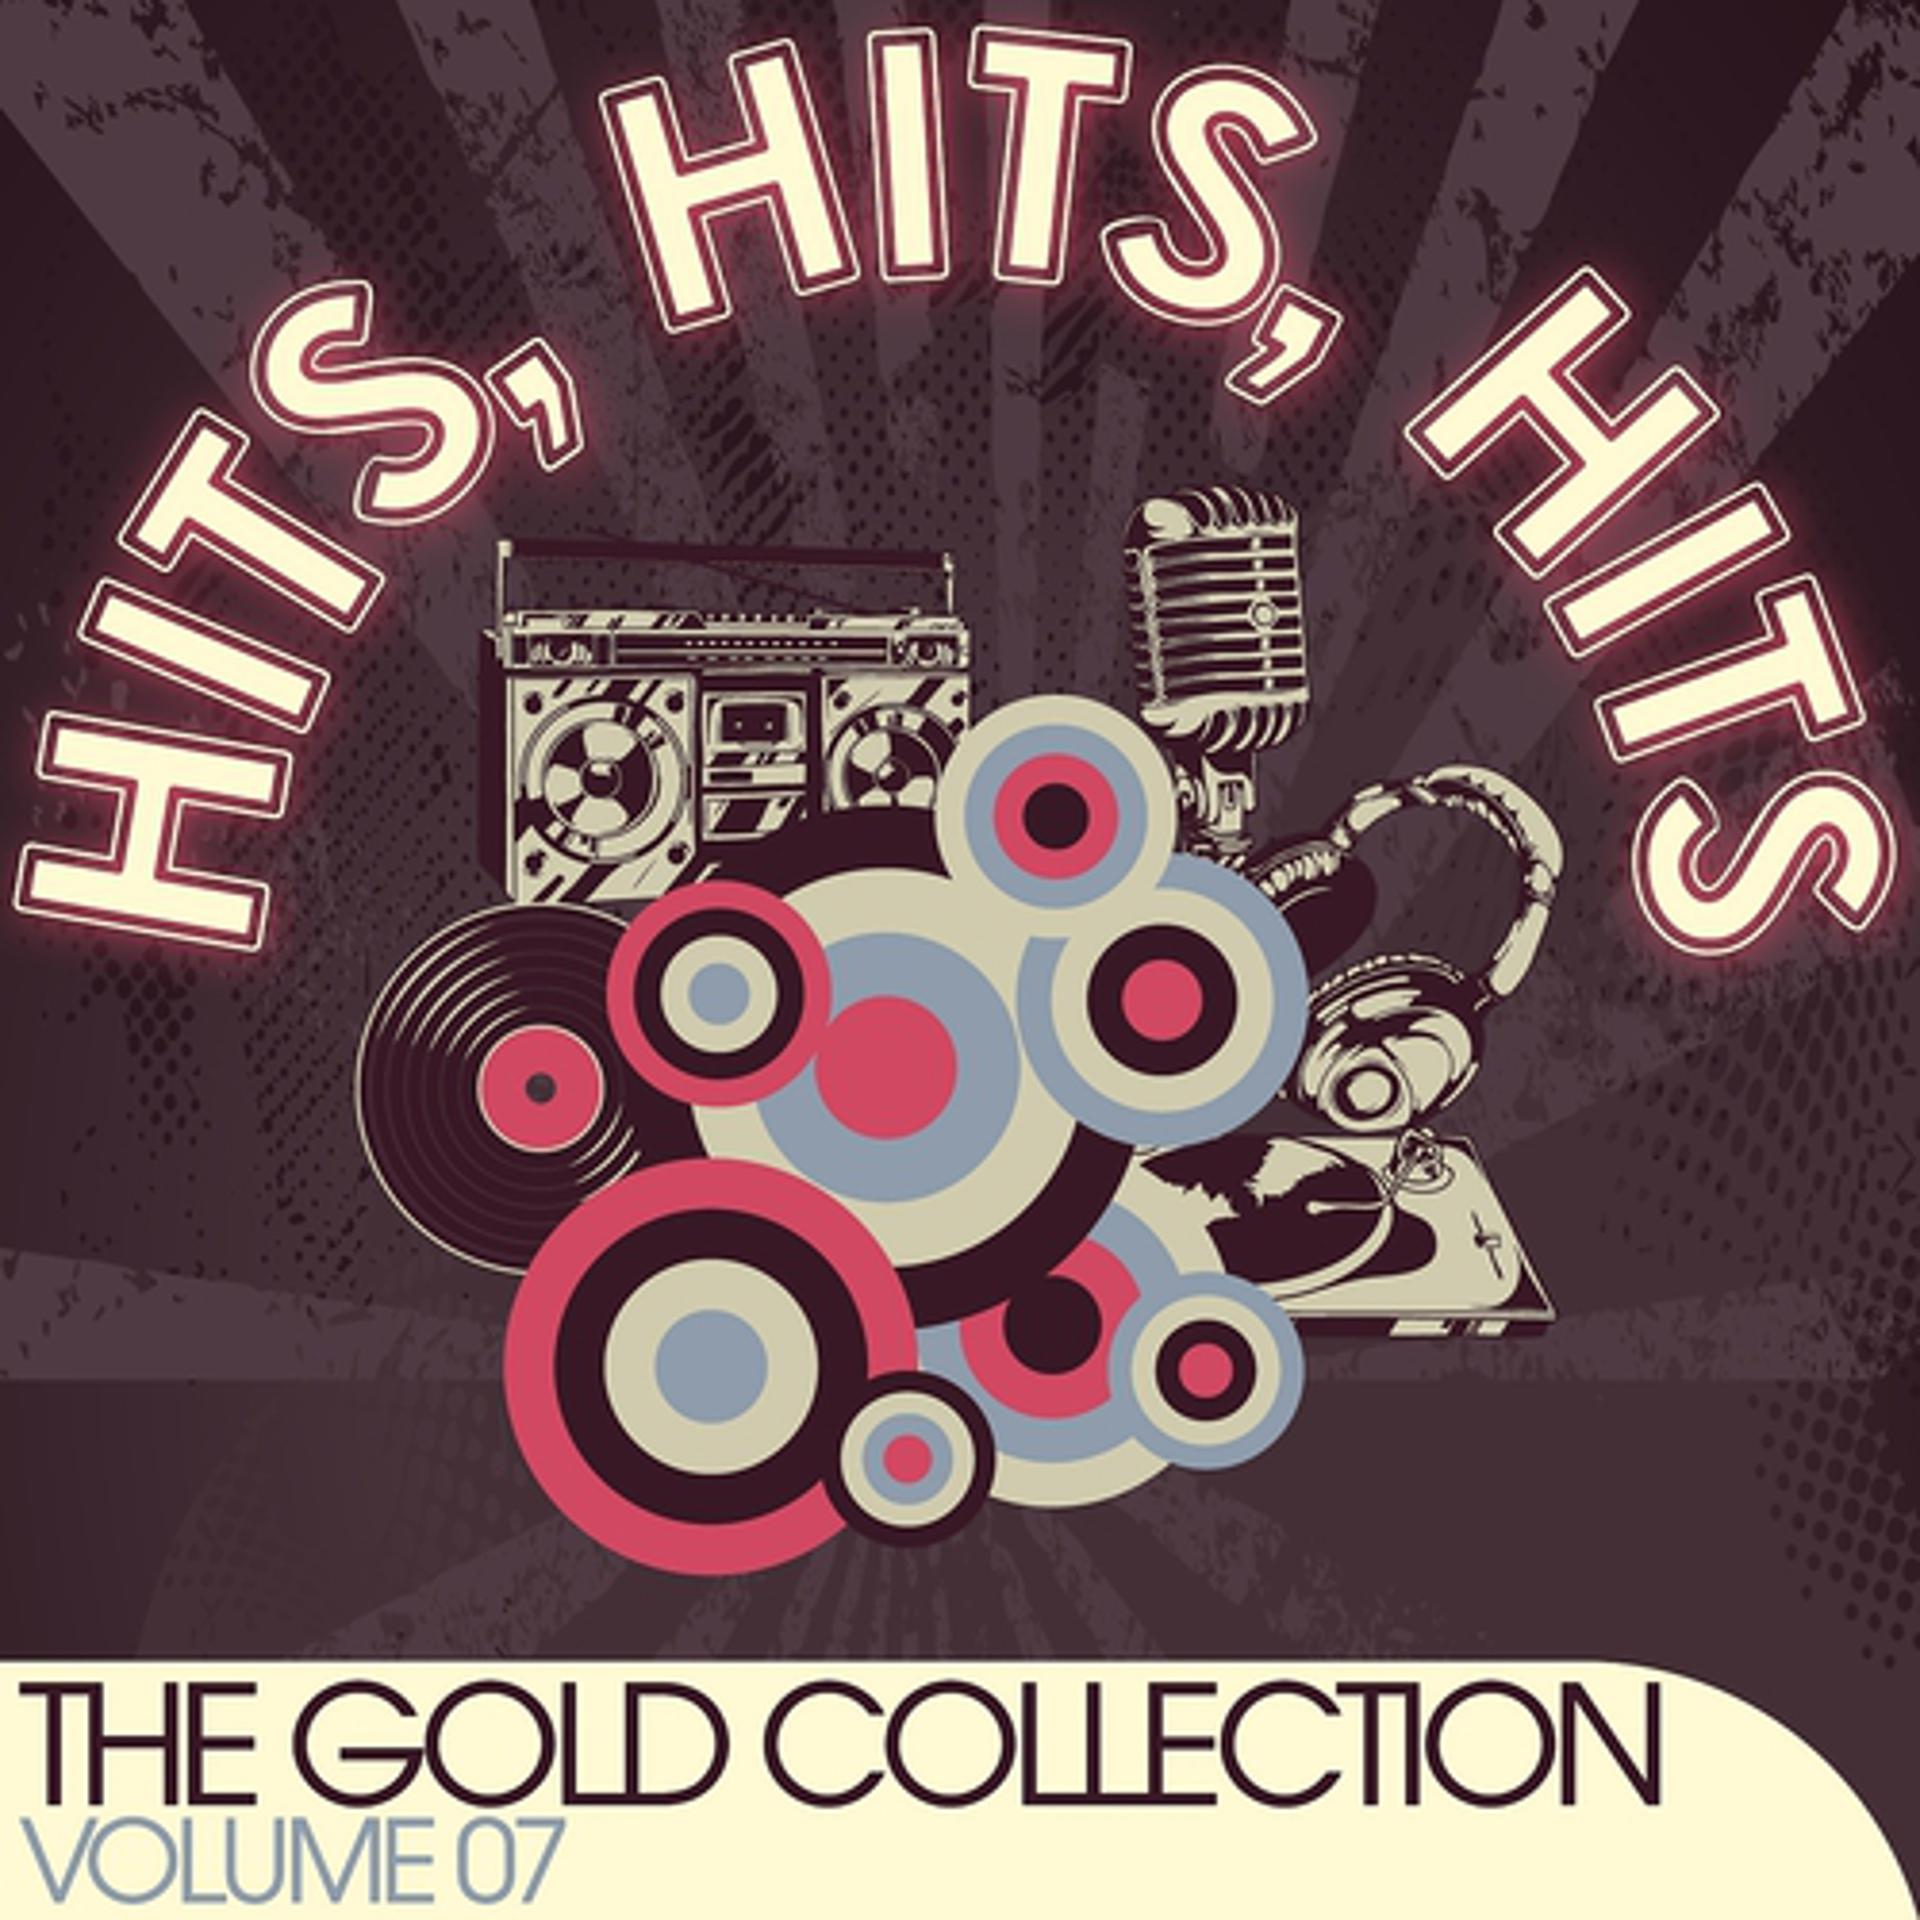 Постер альбома Hits, Hits, Hits - the Gold Collection Volume 07